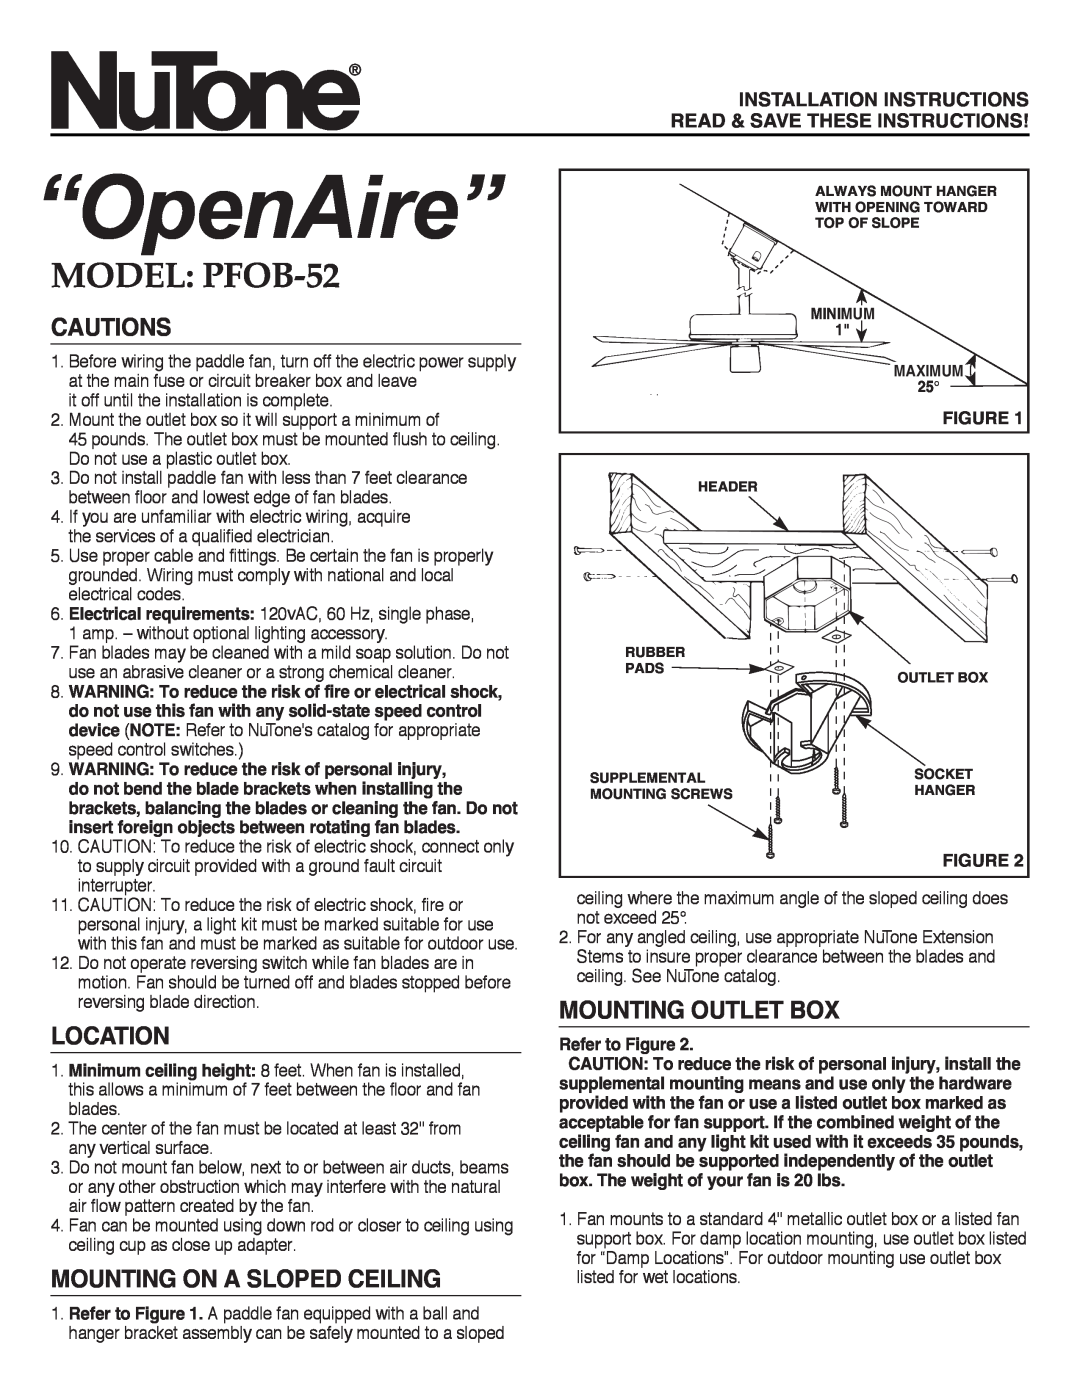 NuTone PFOB-52 installation instructions Cautions, Location, Mounting On A Sloped Ceiling, Mounting Outlet Box, “OpenAire” 